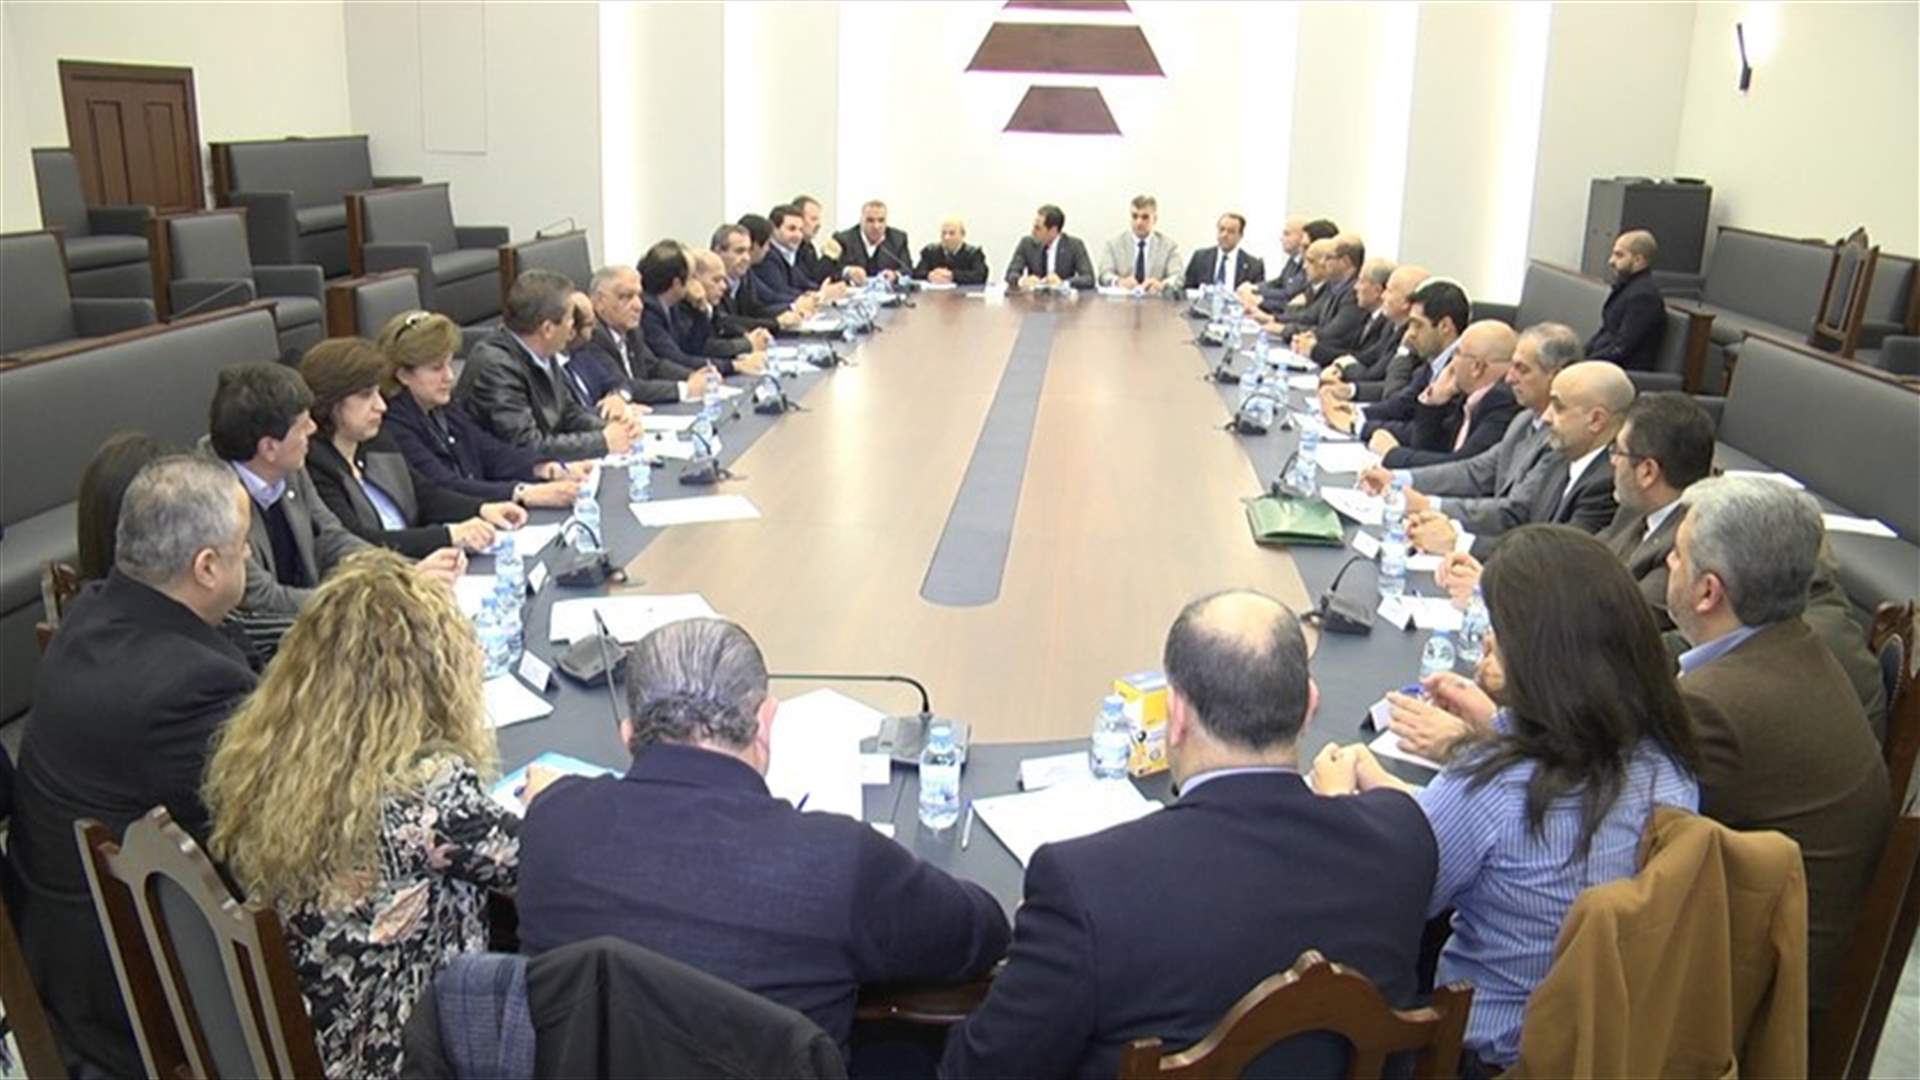 Kataeb party: Lebanon must be kept away from policies of regional axis